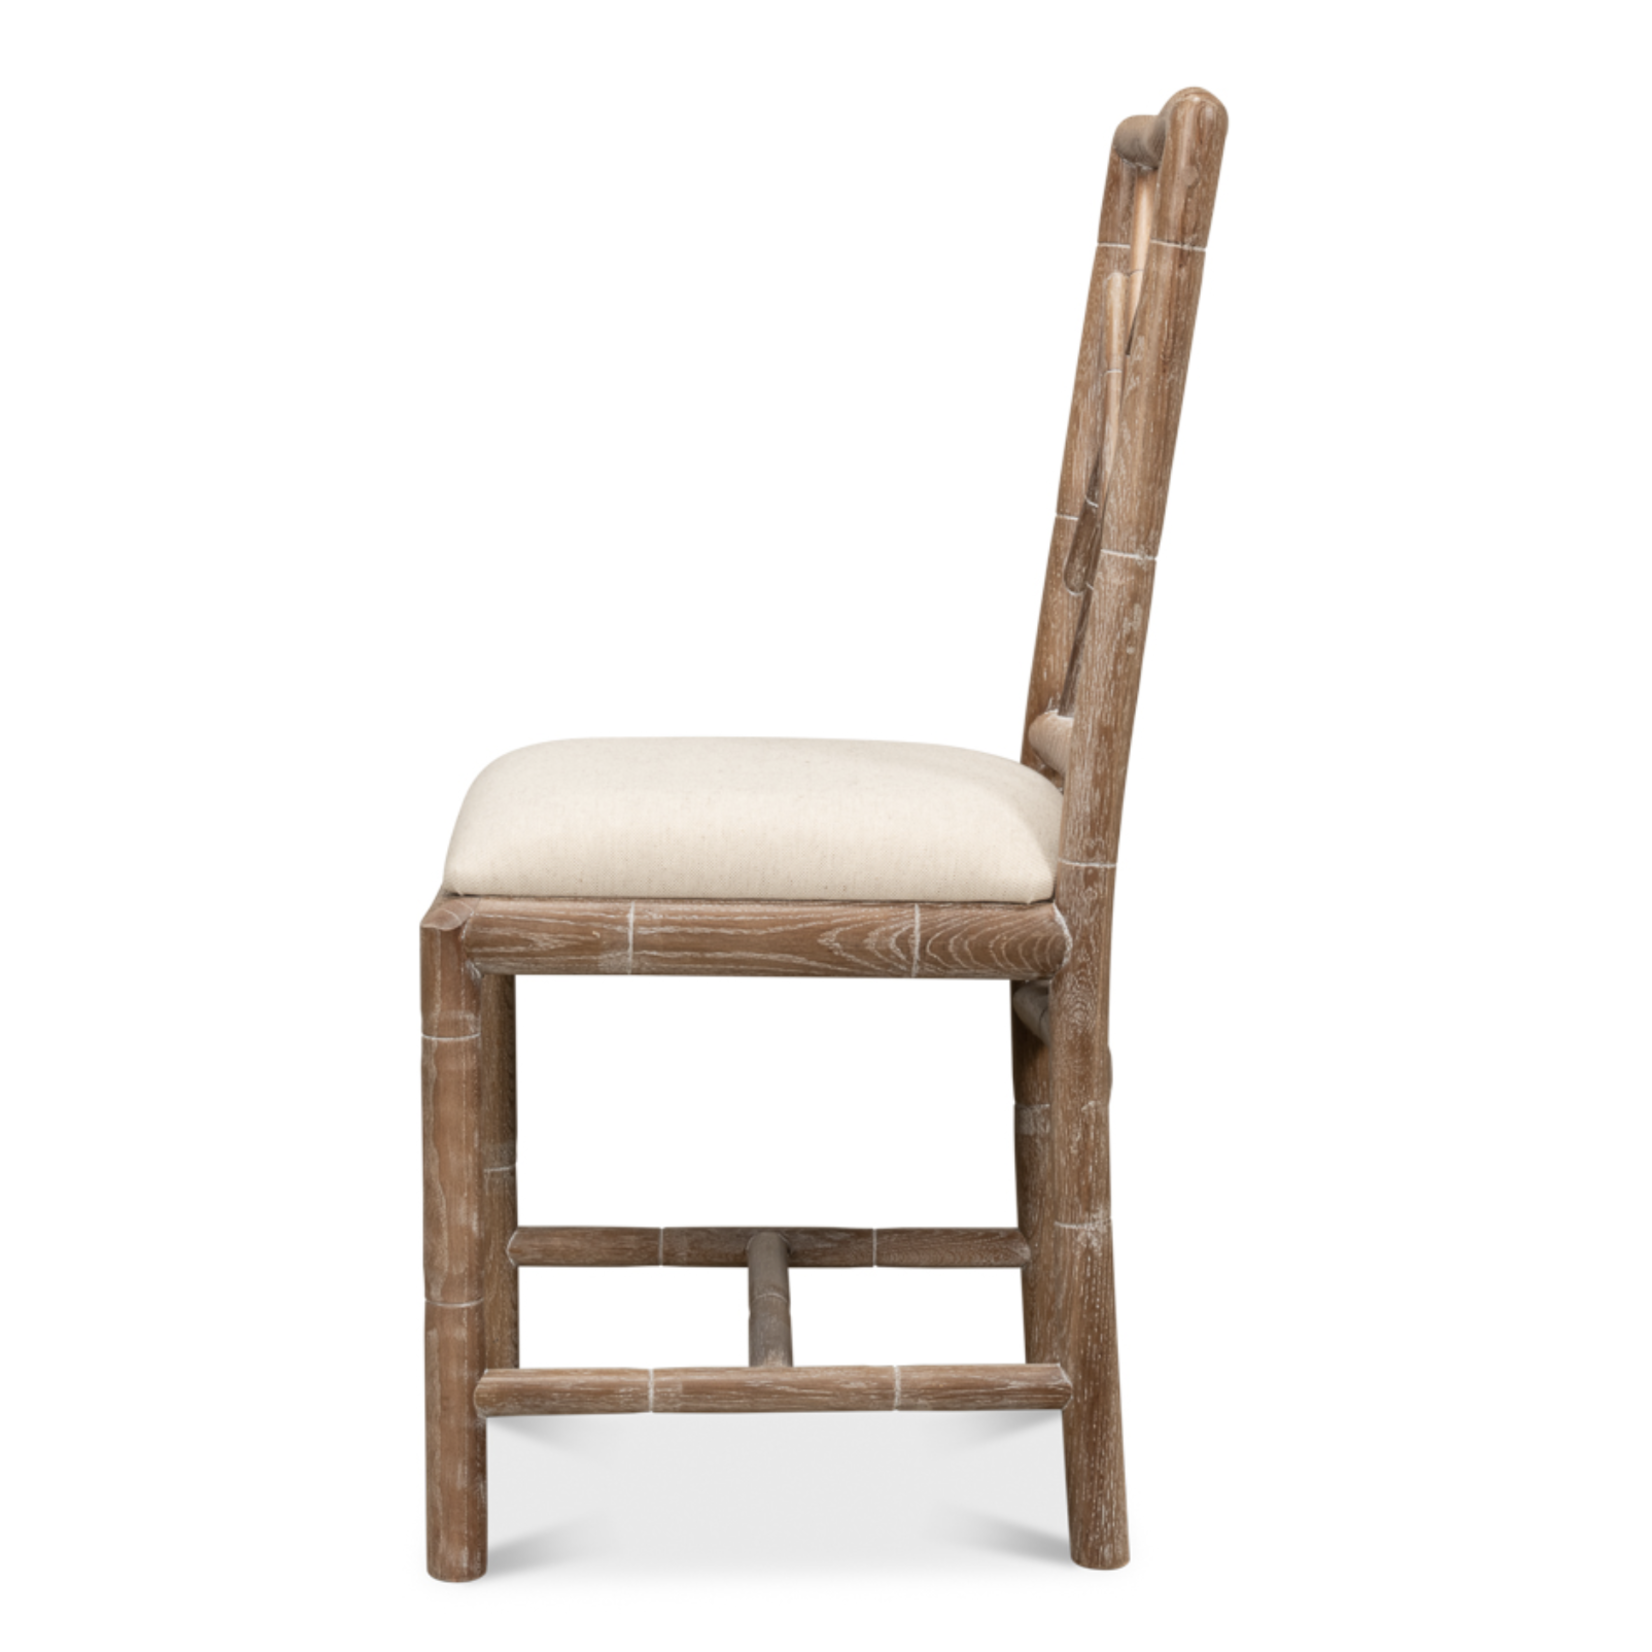 Outside The Box Brighton Solid Oak Hand Carved Dining Chair - Natural Oak